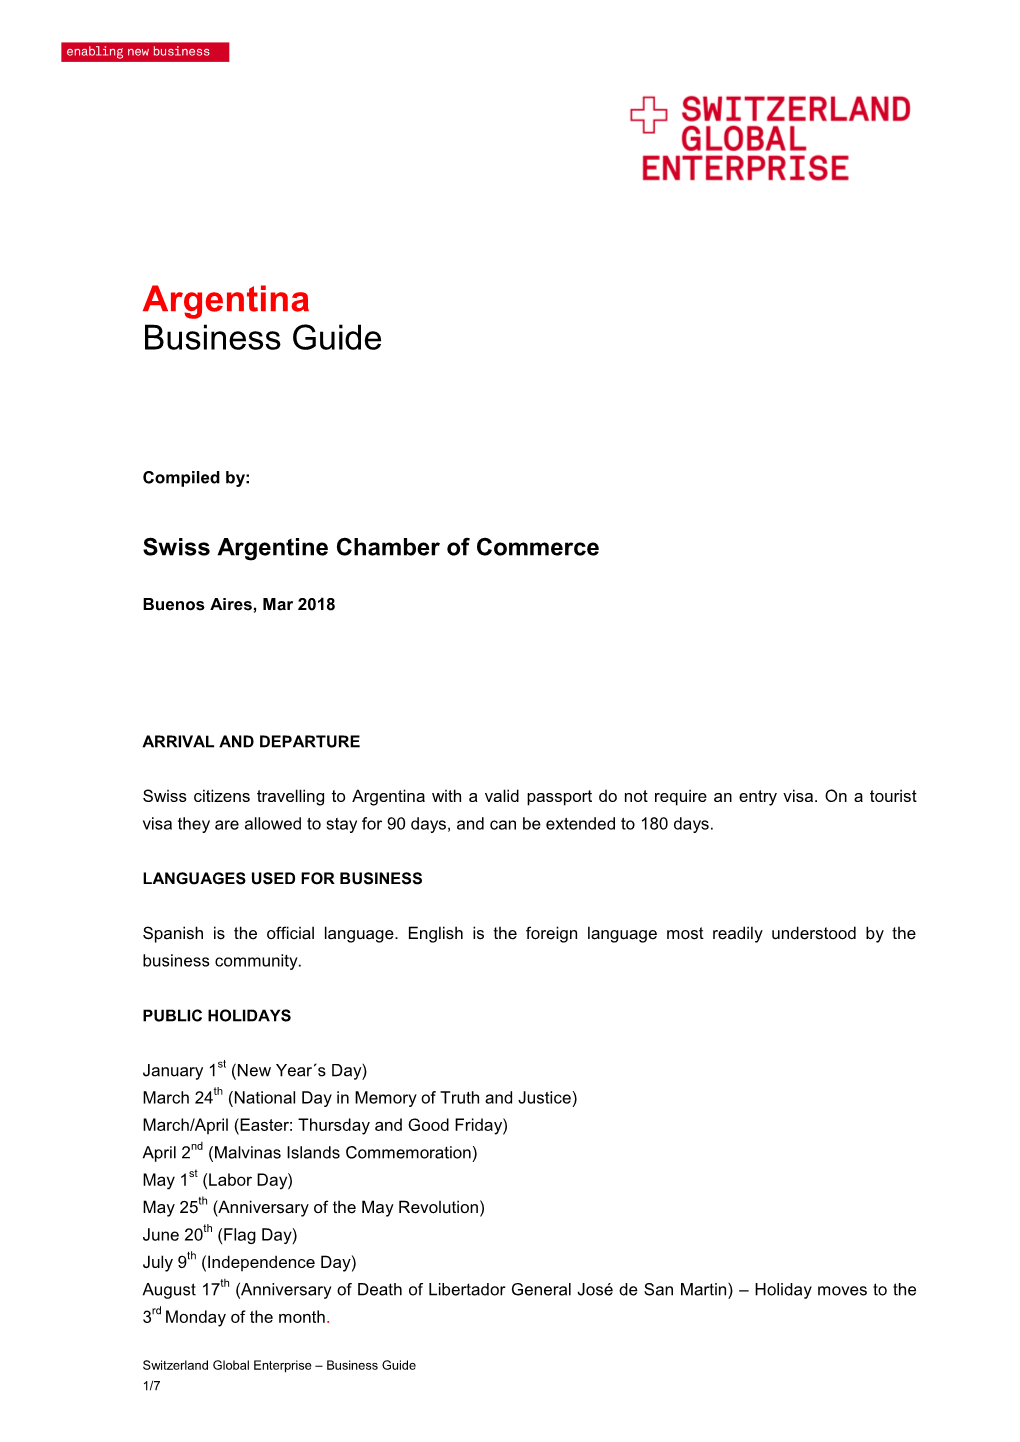 Argentina Business Guide